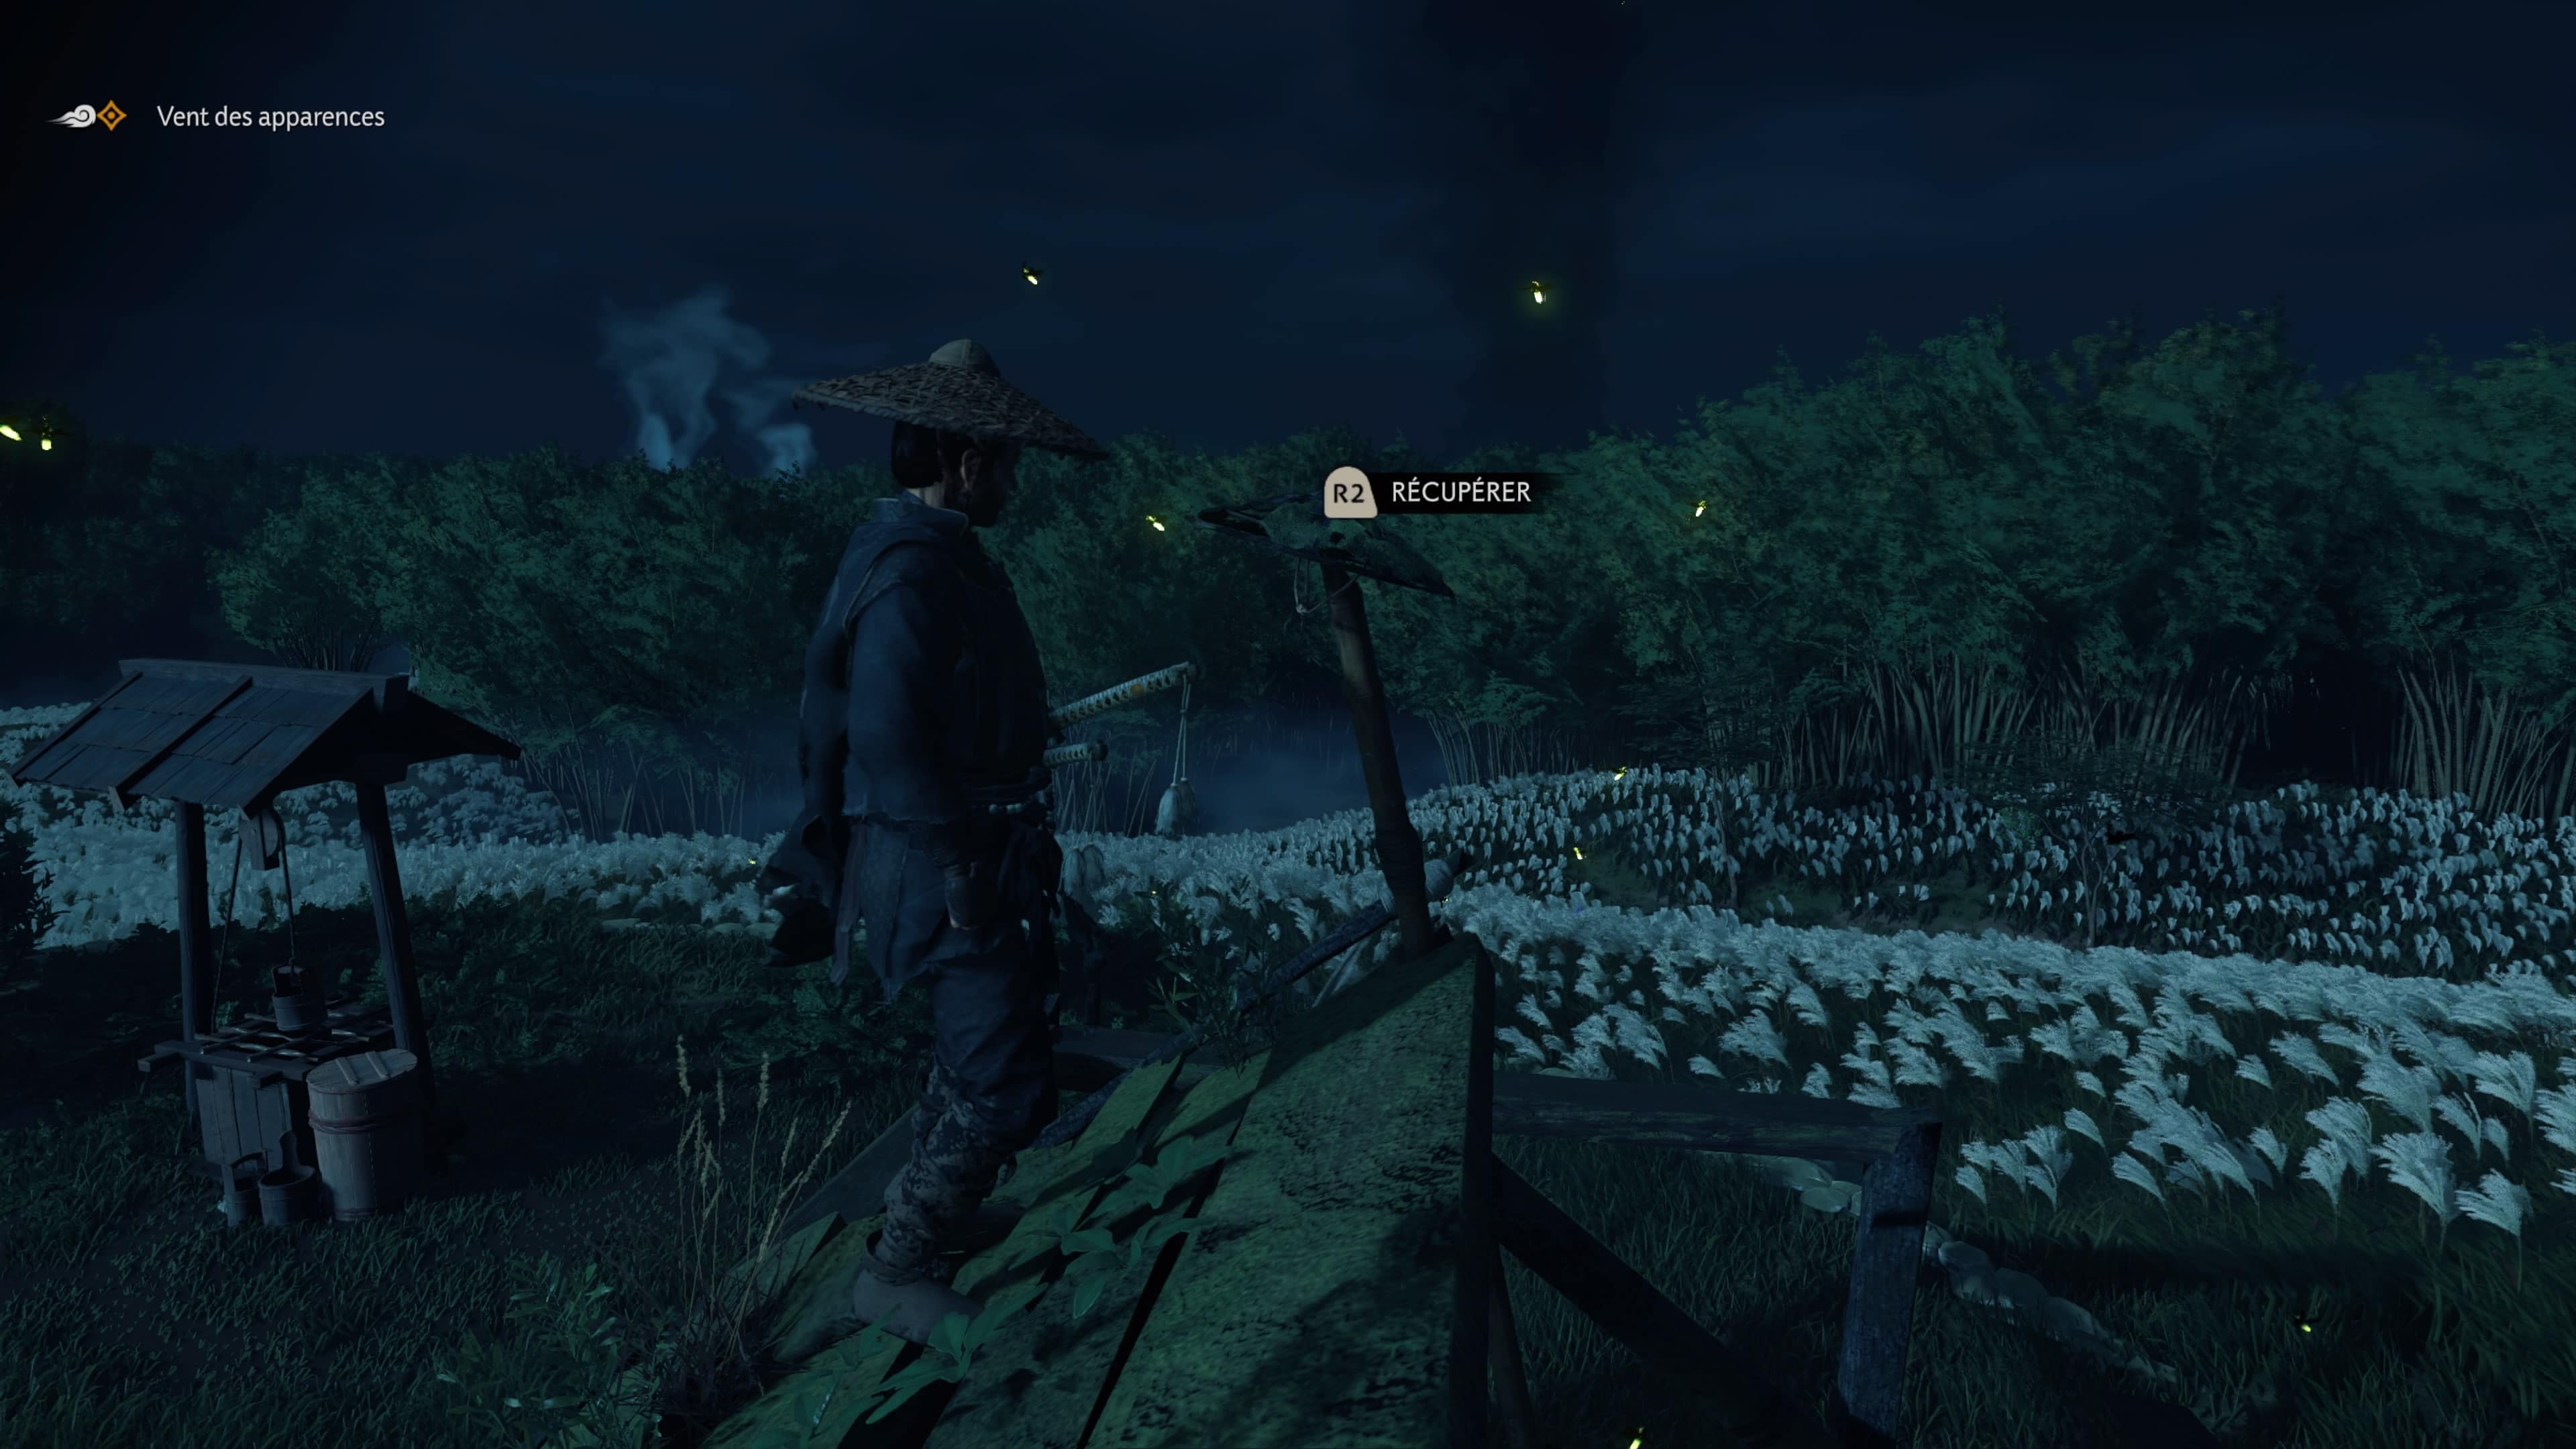 Ghost of tsushima chapeau paille riviere 3 91